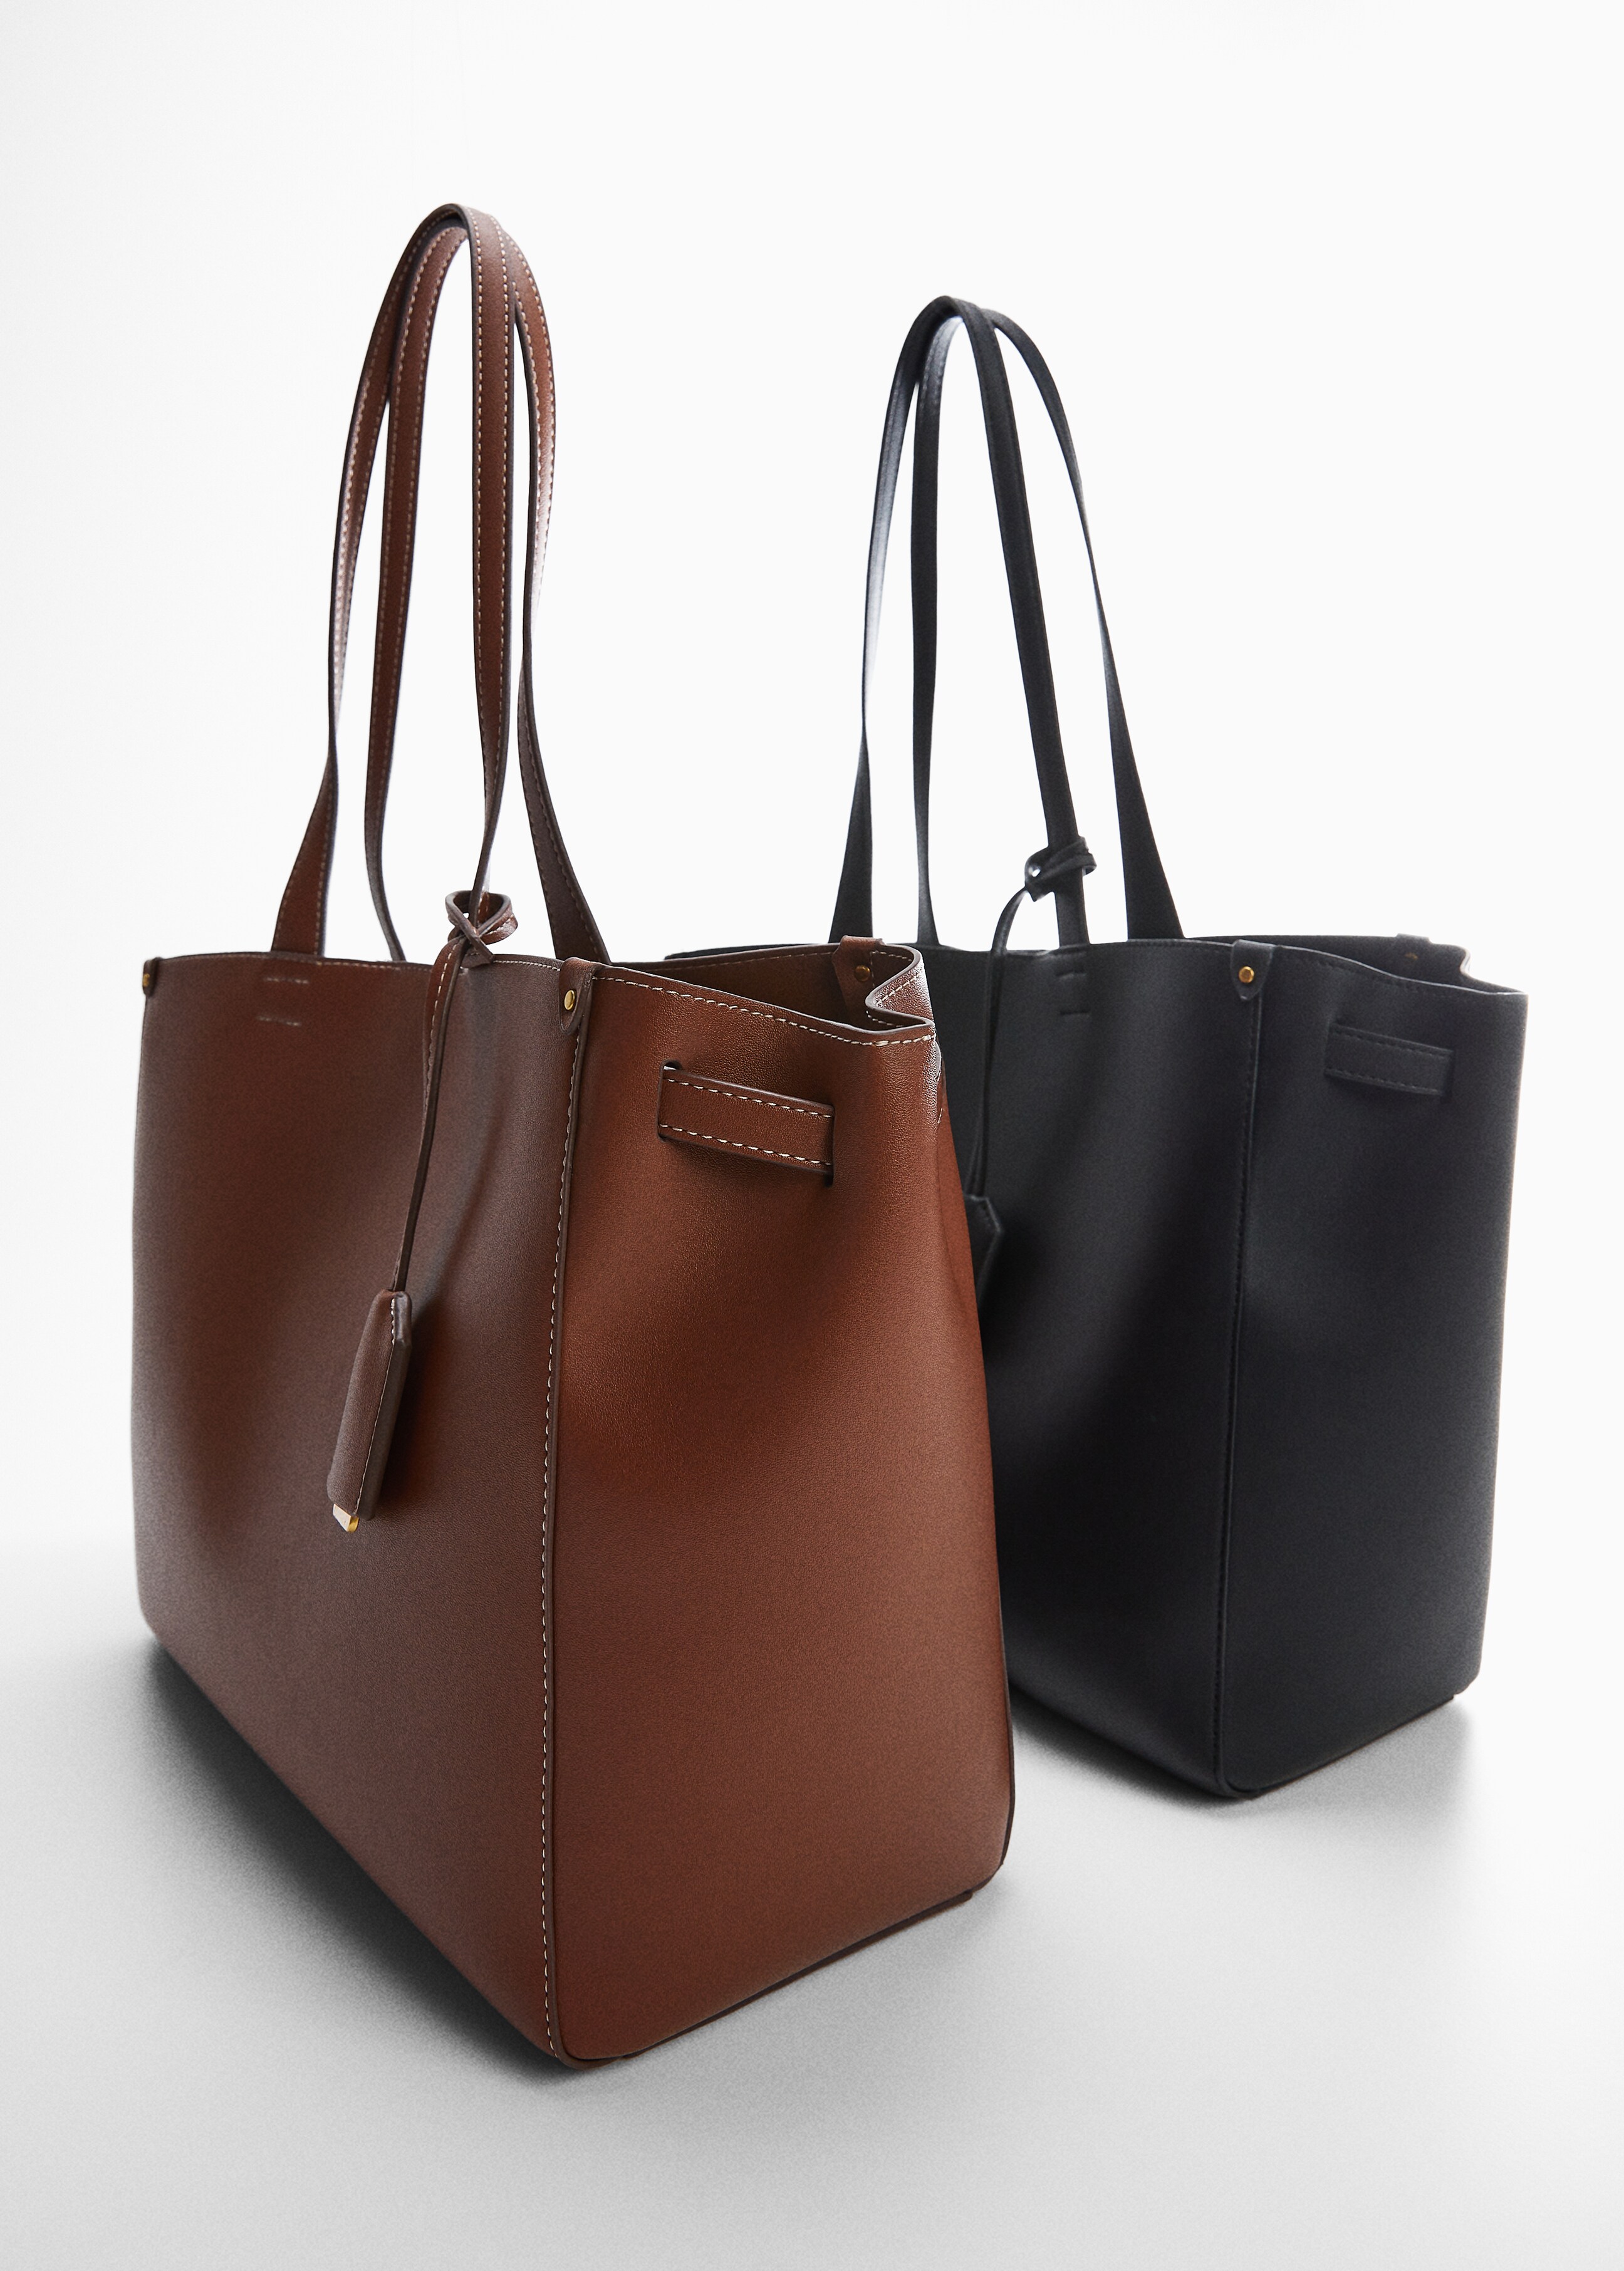 Shopper bag with double handle - Details of the article 5